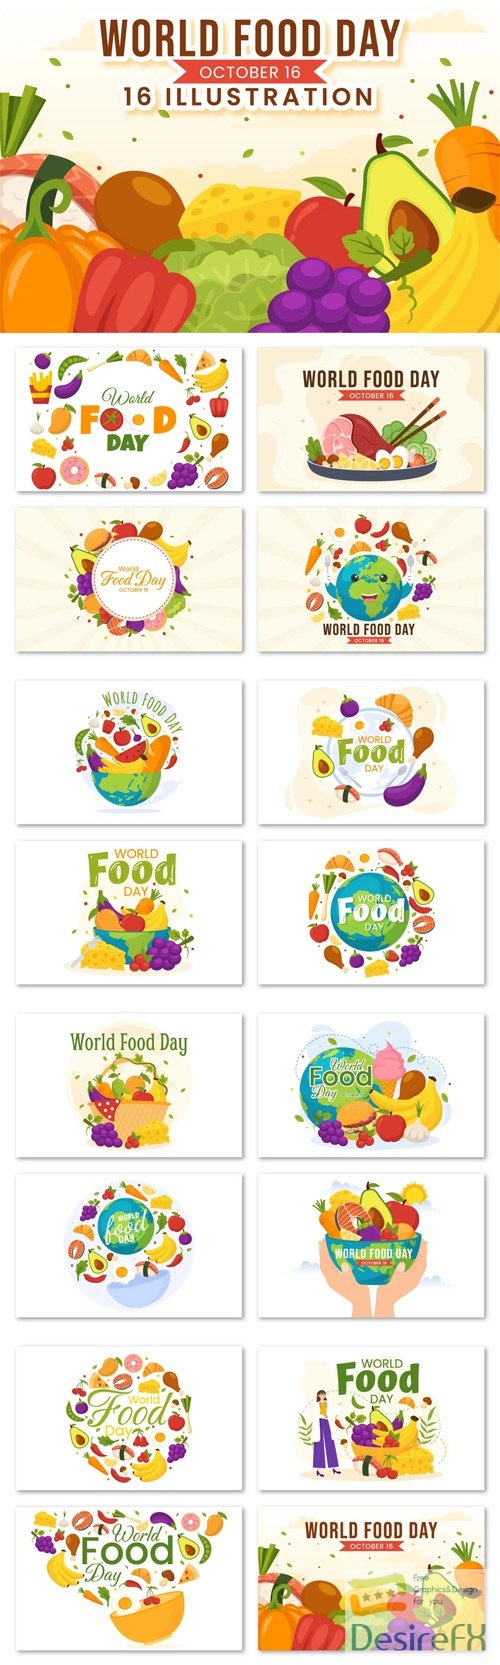 World Food Day Illustrations Pack